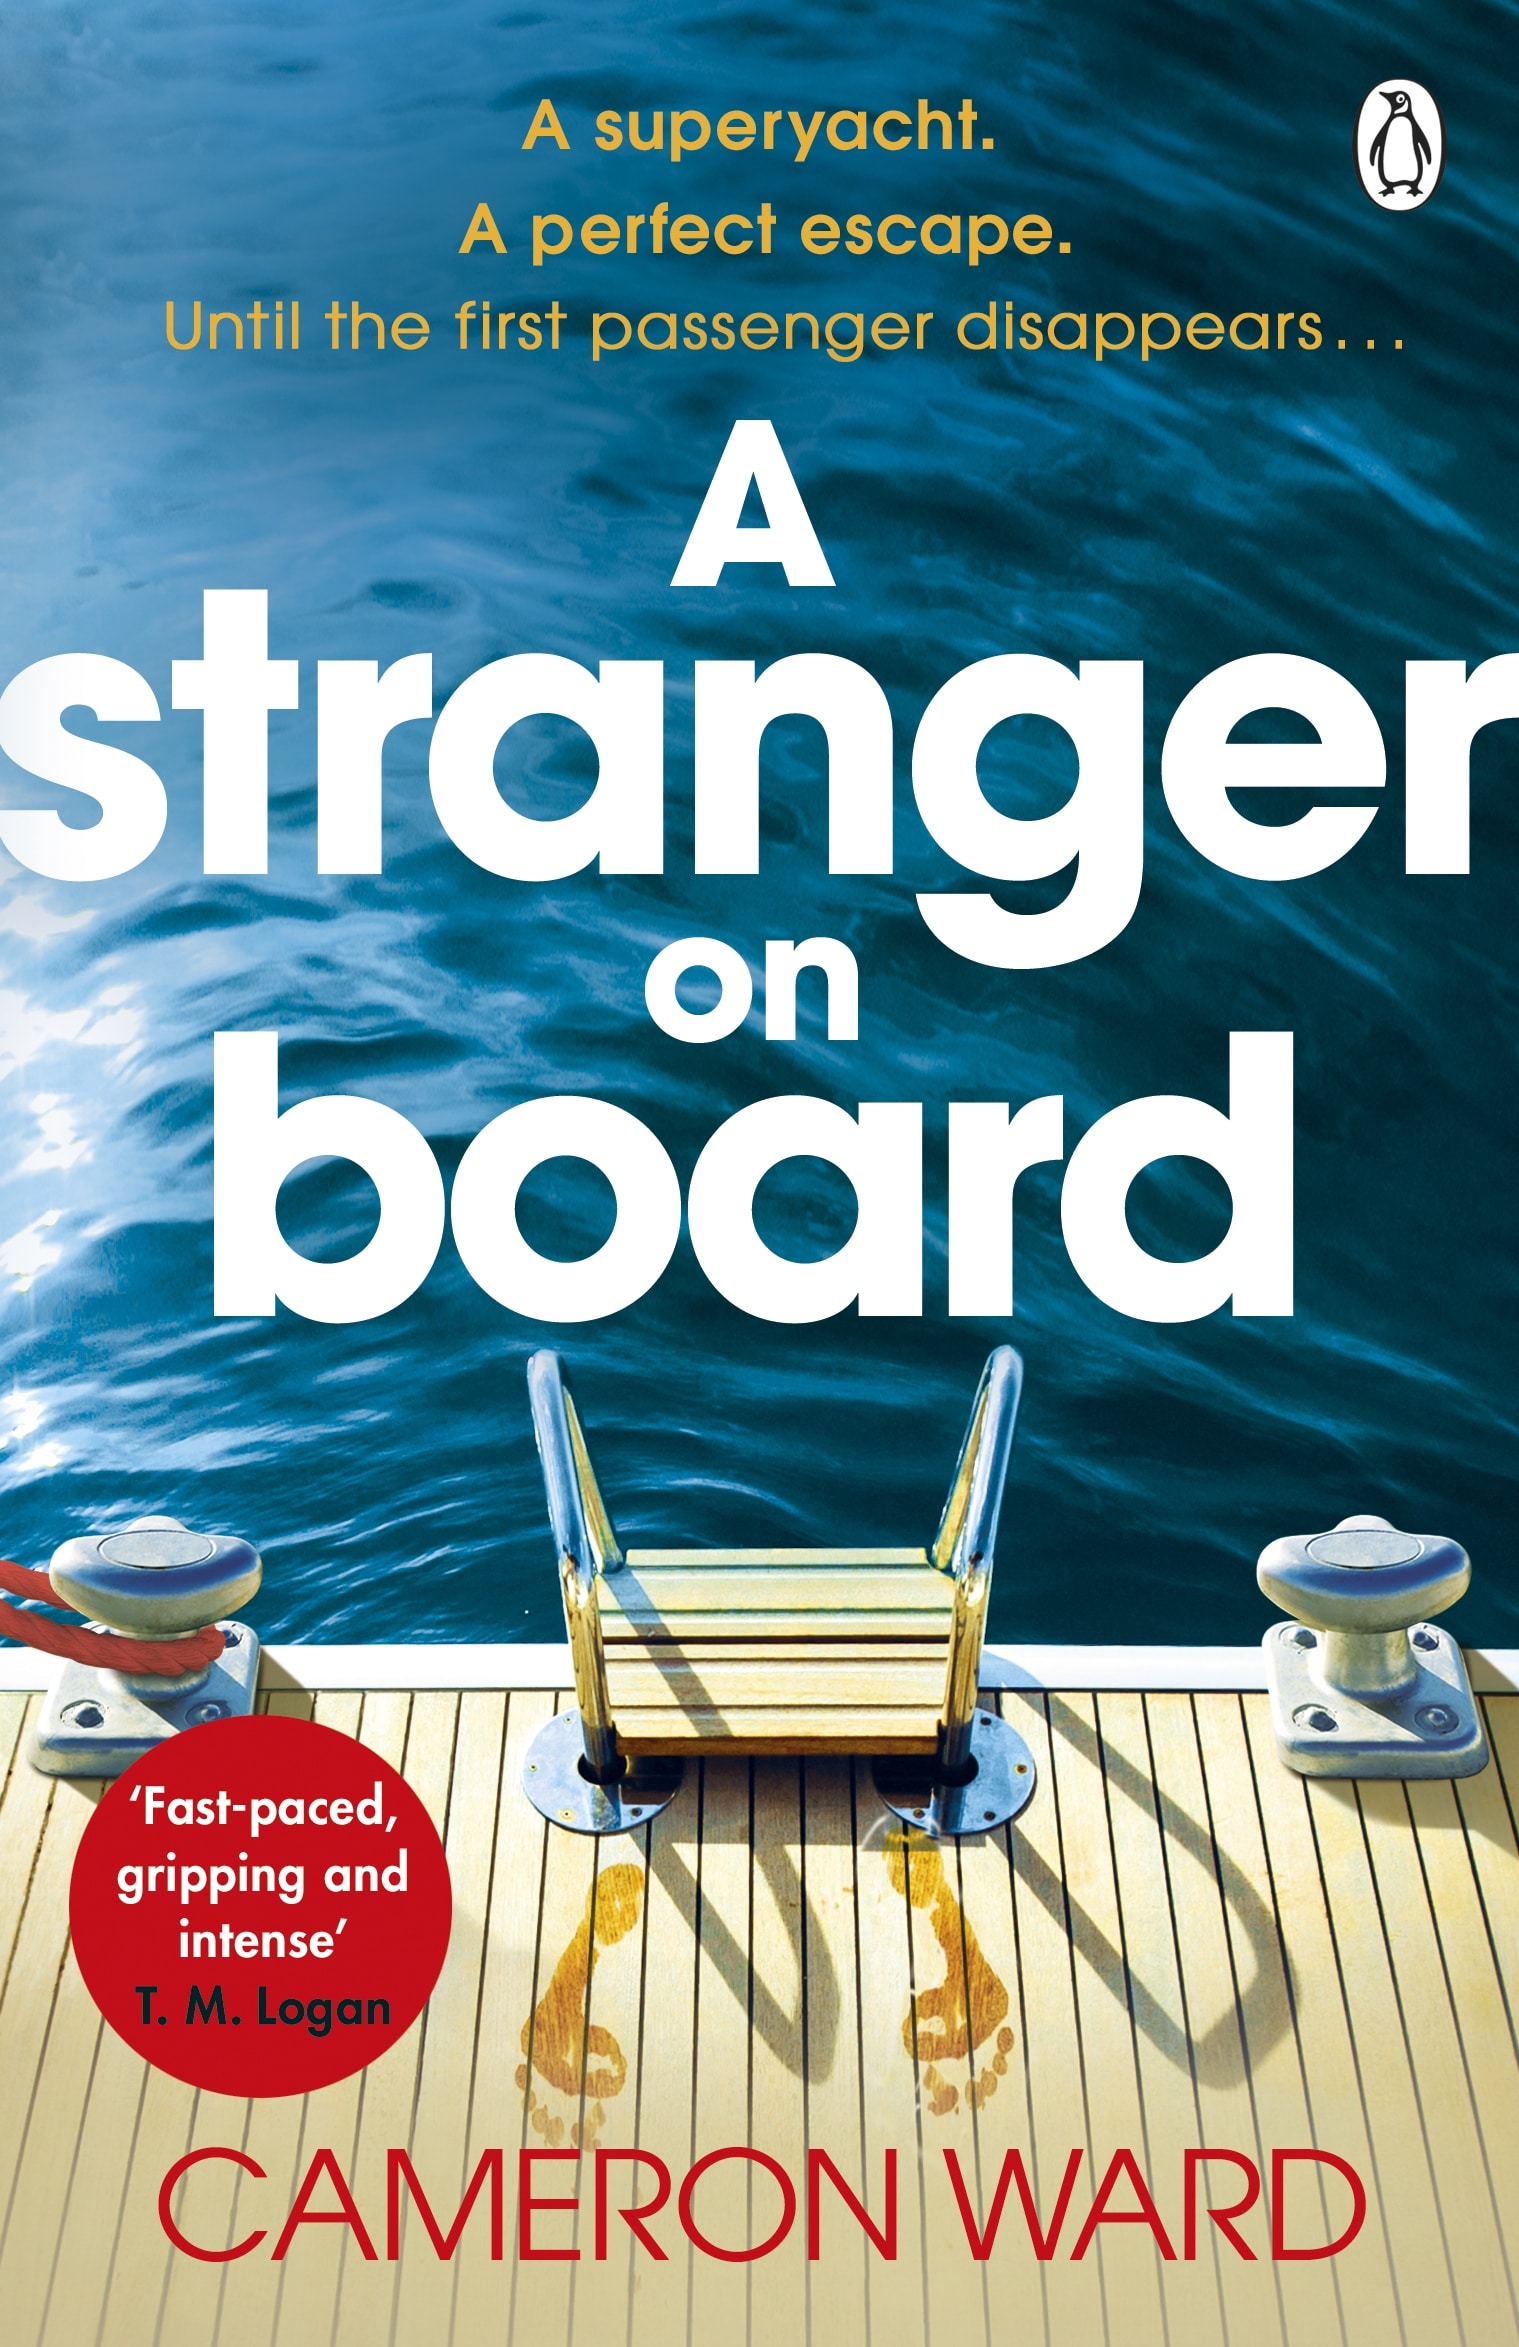 Book cover of A Stranger On Board by Cameron Ward